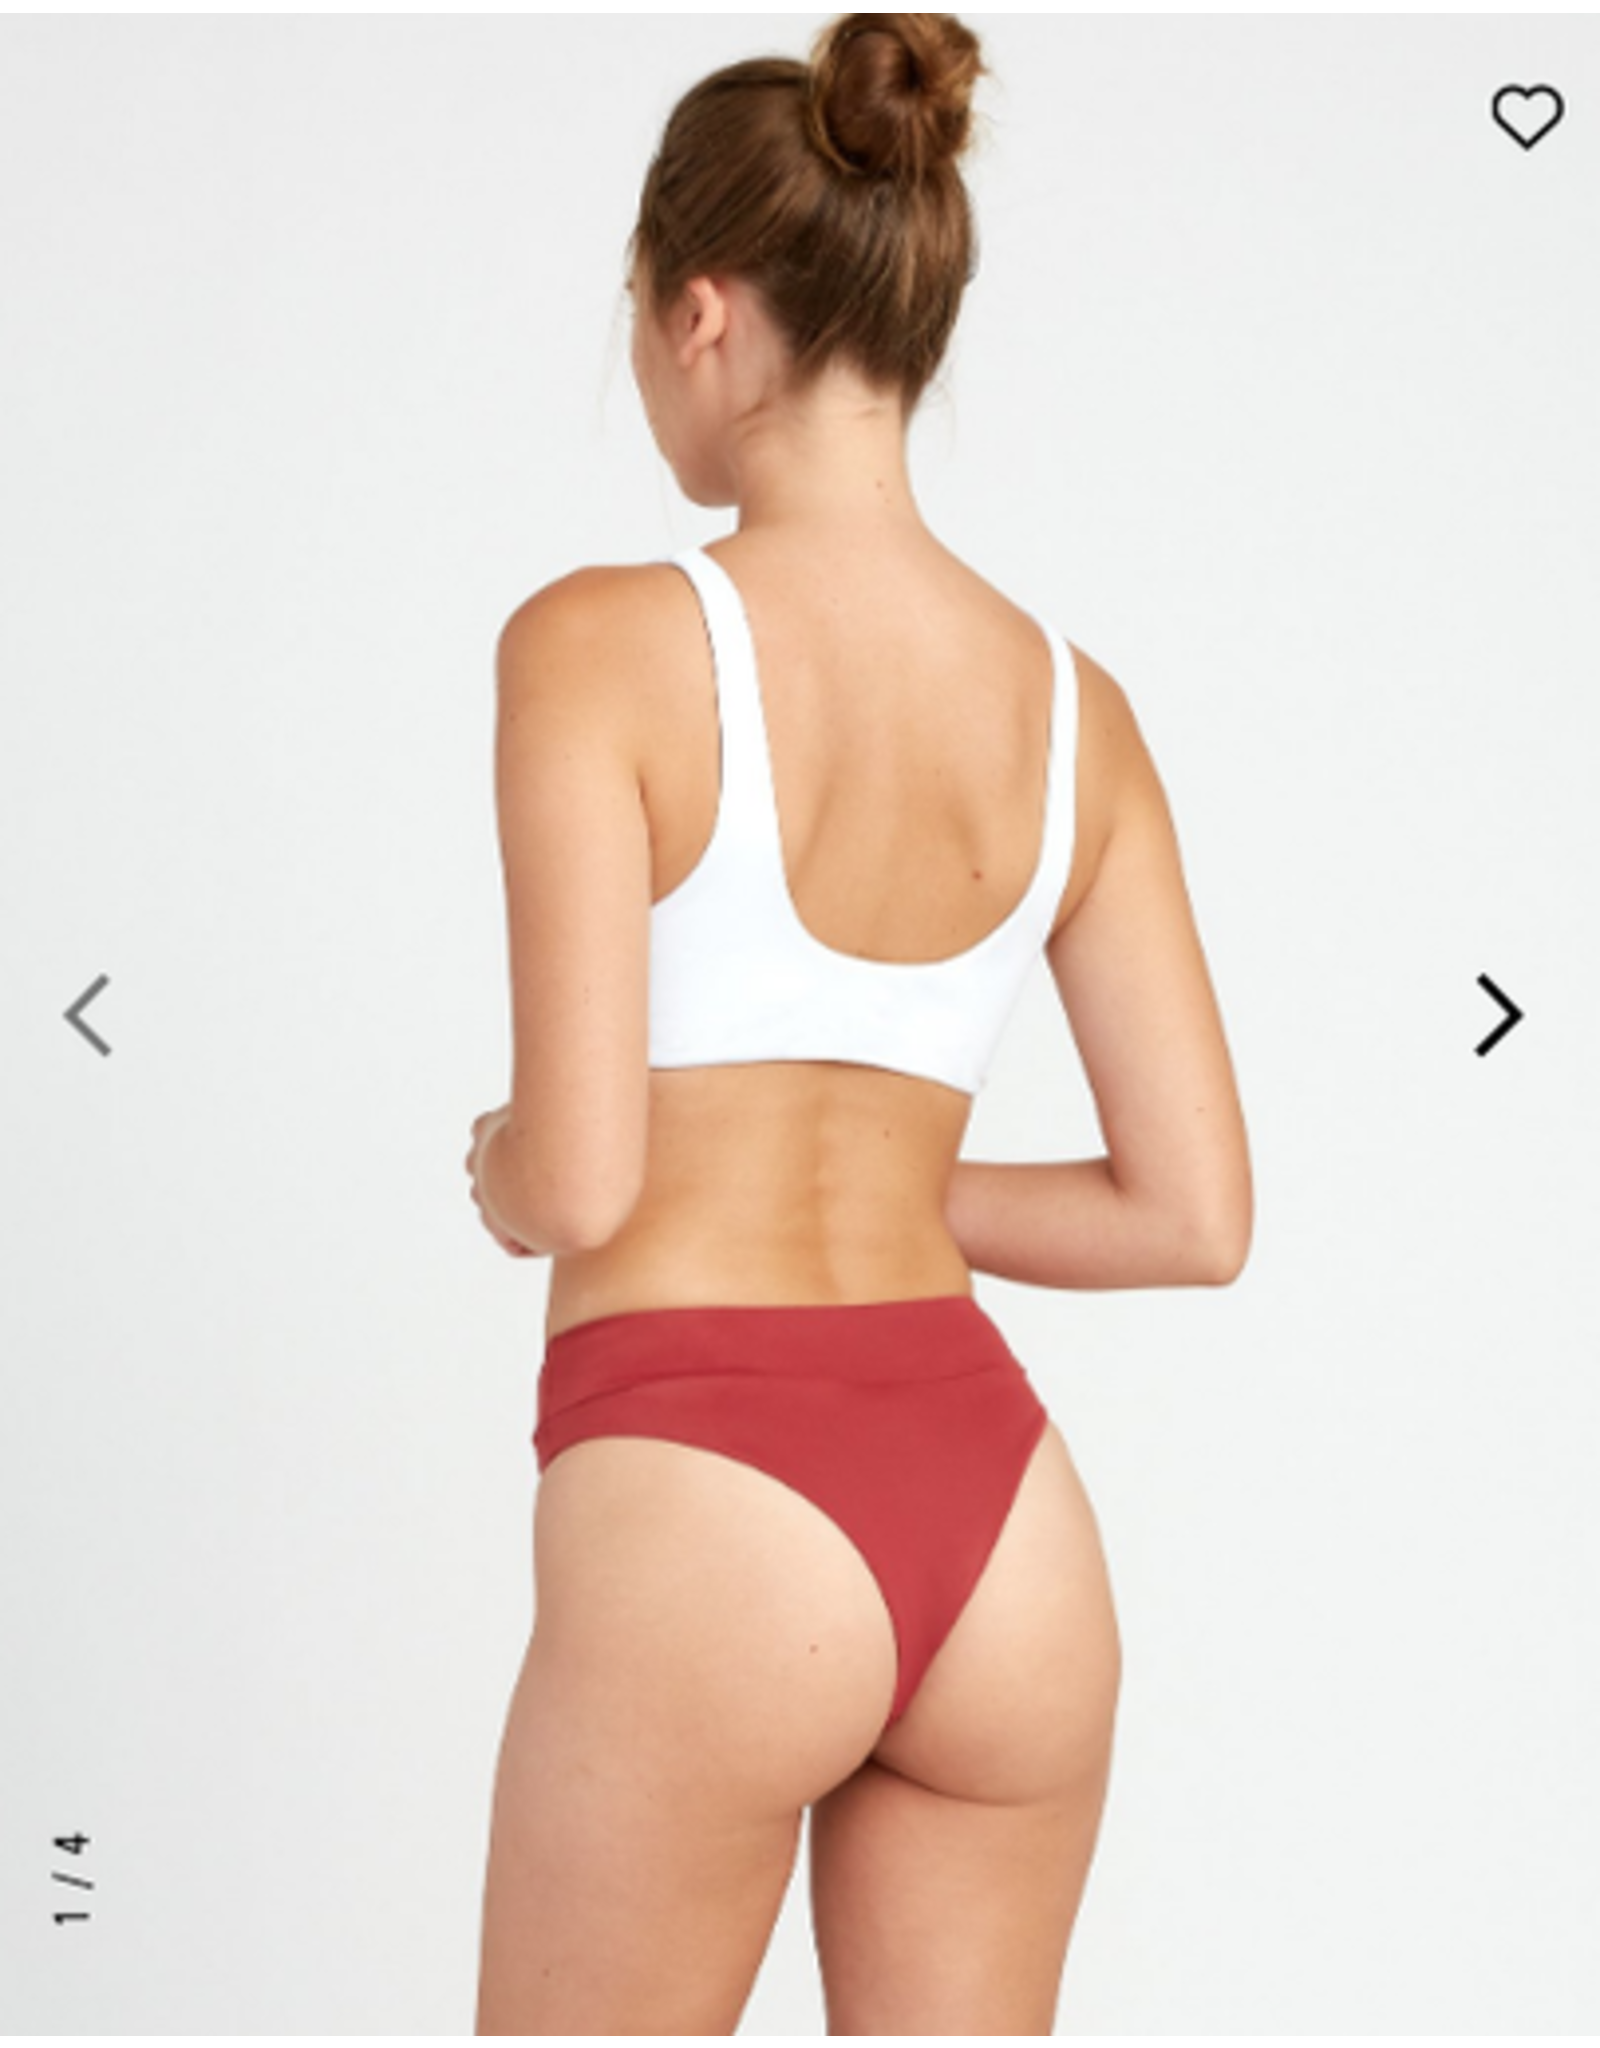 RVCA SOLID HIGH RISE CHEEKY